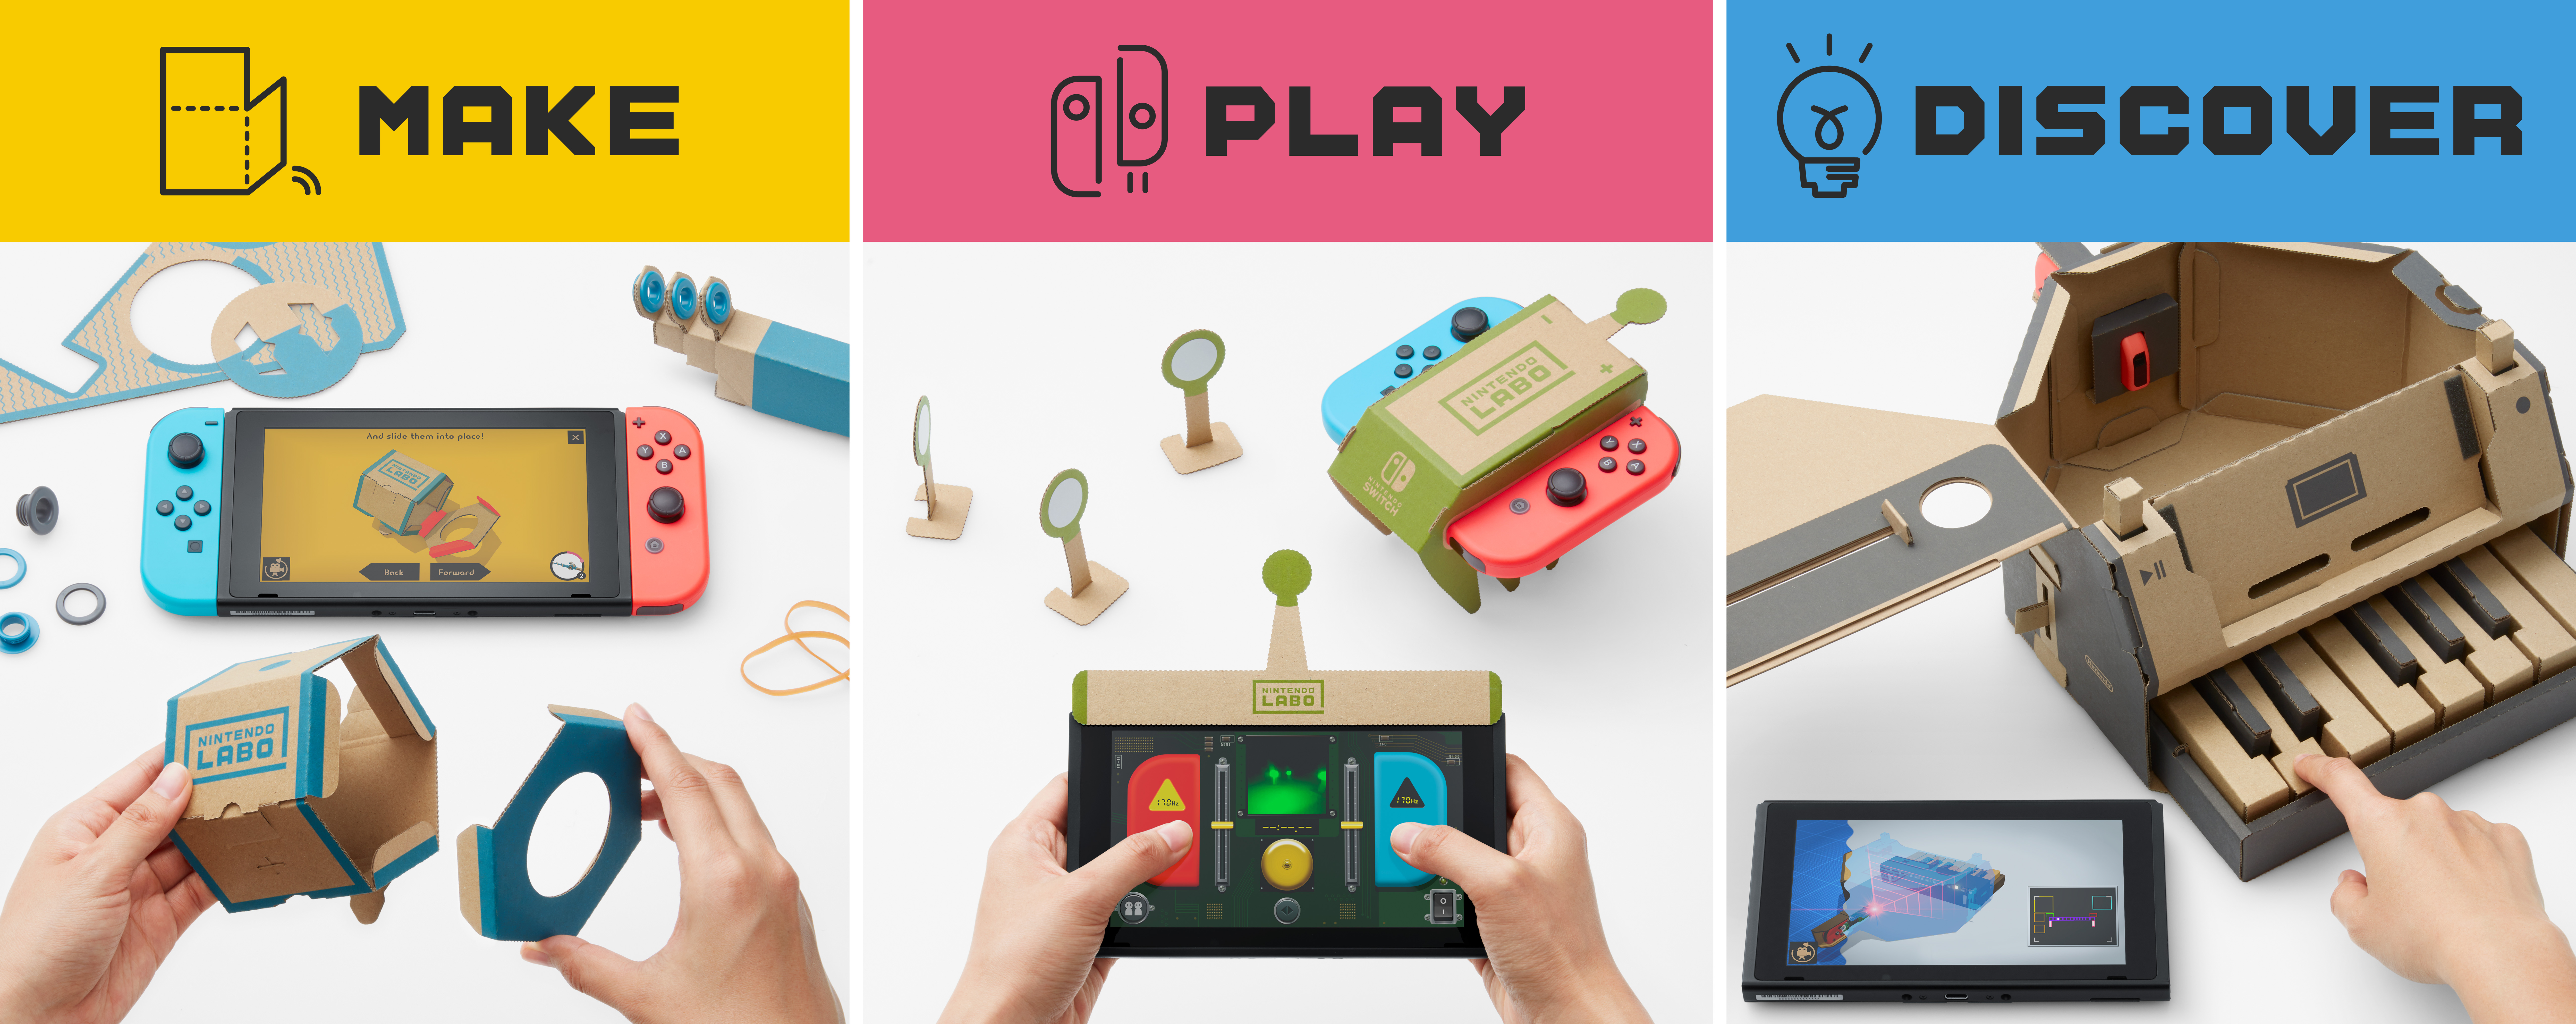 Nintendo Labo, the Nintendo Switch's new line of interactive make, play and discover experiences